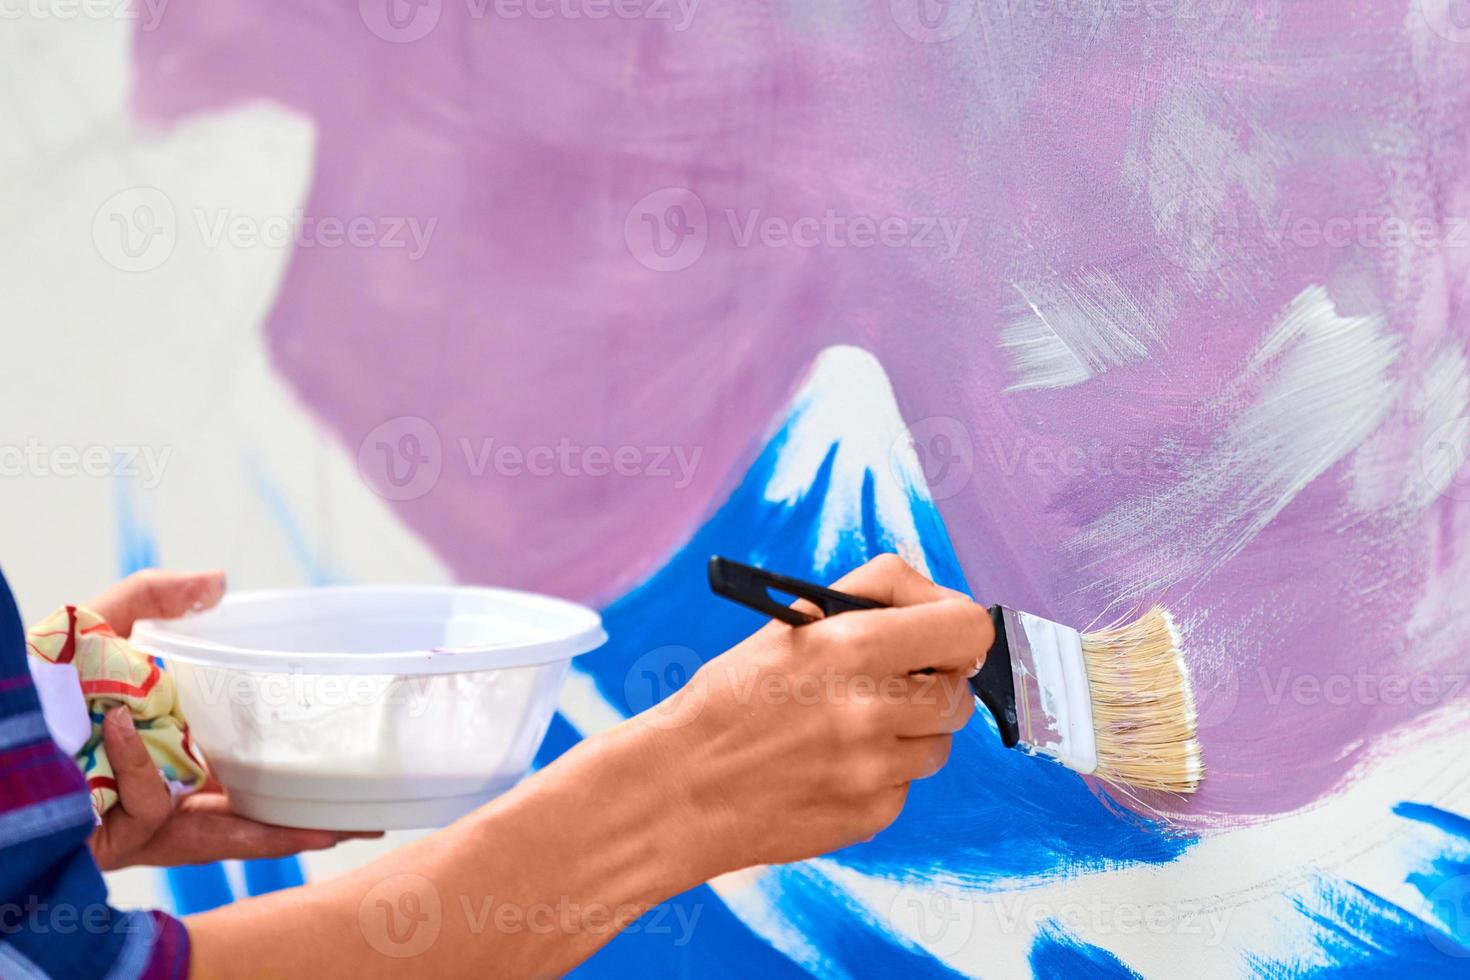 Female artist working on abstract acrylic painting, hand moving paint brush, large canvas outdoor photo